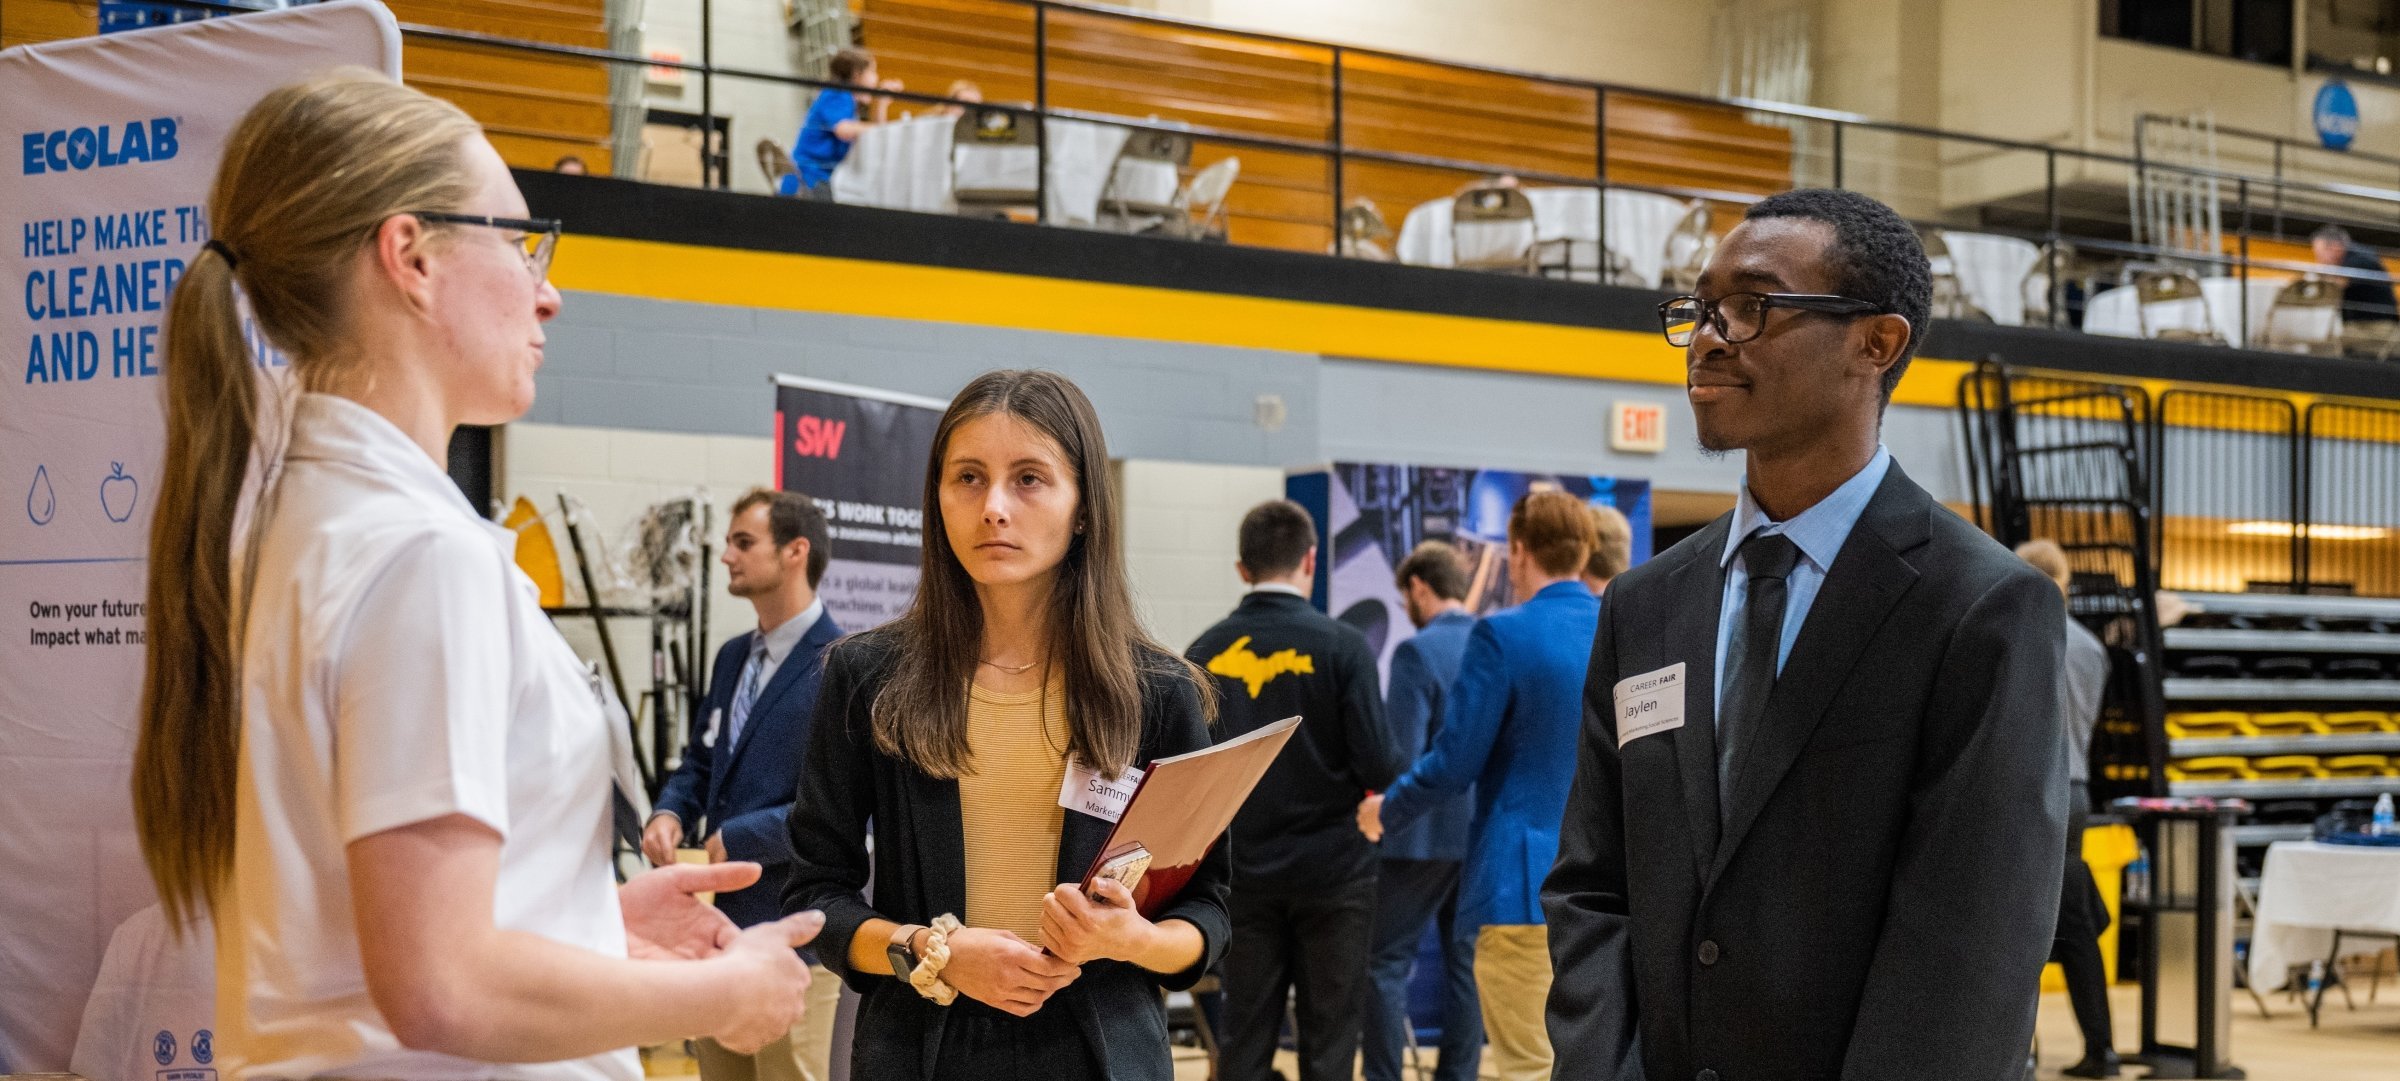 Students participating in career fair